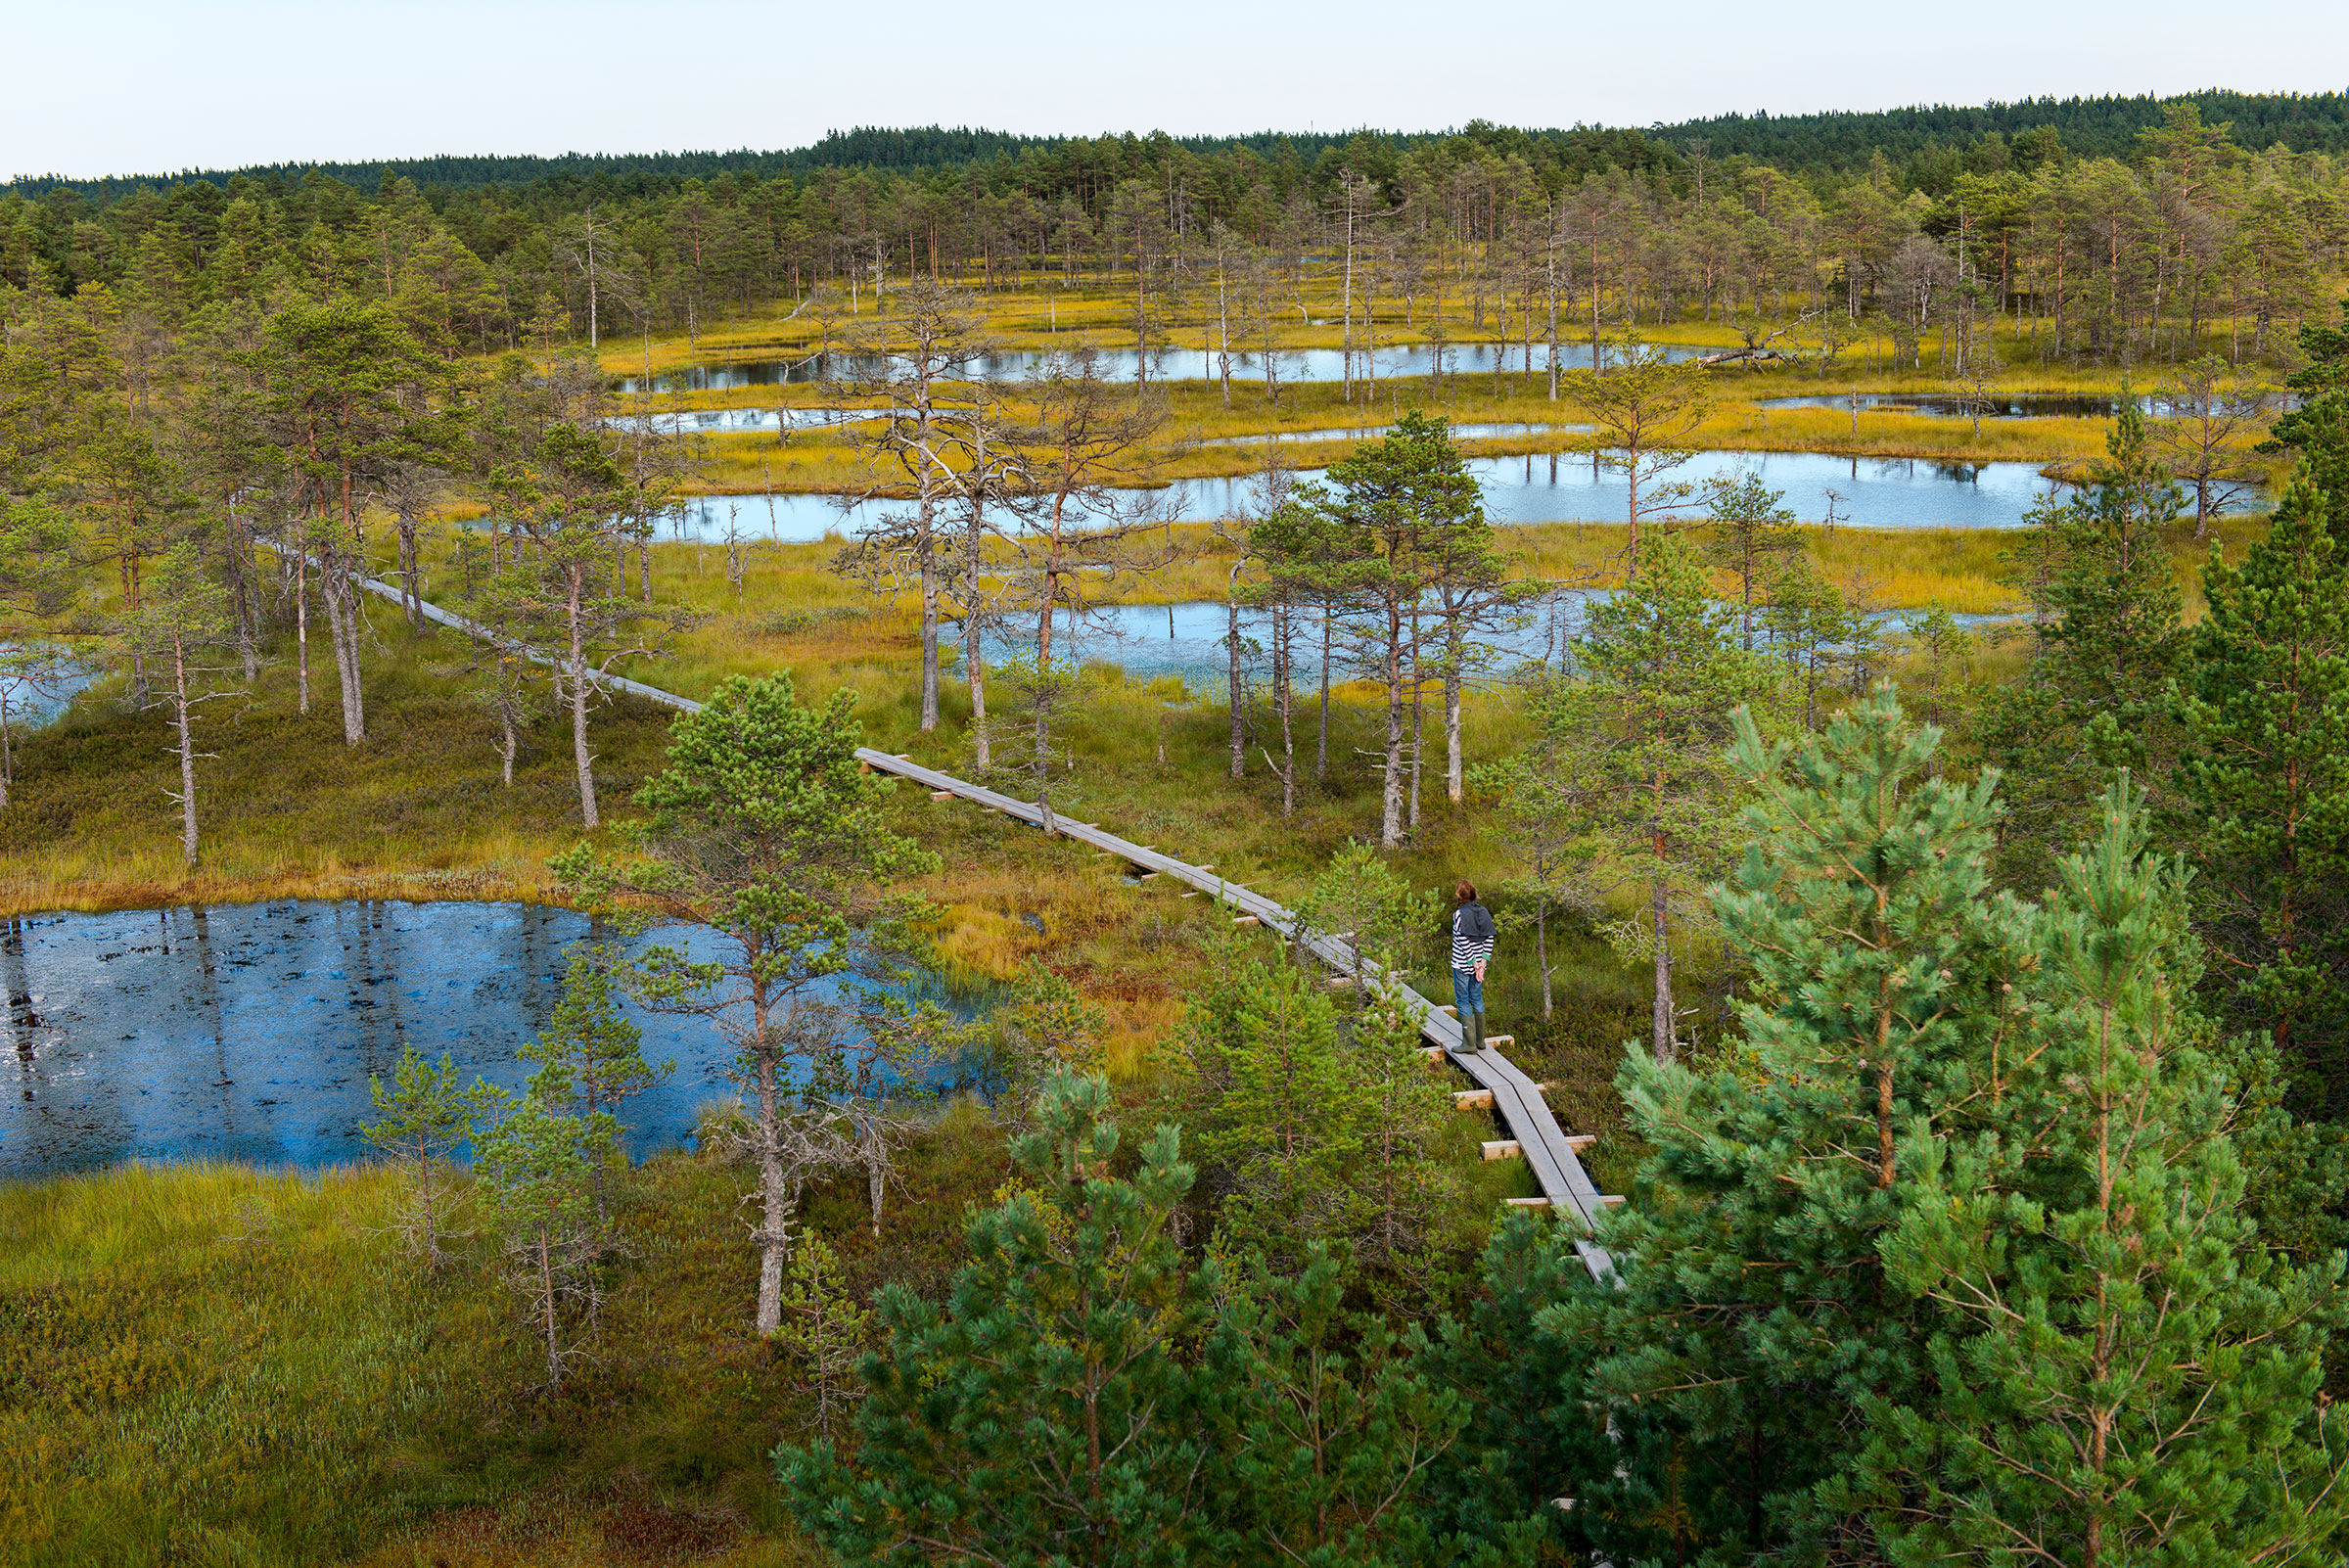 Lahemaa National Park in Estonia is connected to the new long-distance Forest Trail, which links Tallinn, Estonia to neighboring Latvia and Lithuania. (Alison Wright—Getty Images)